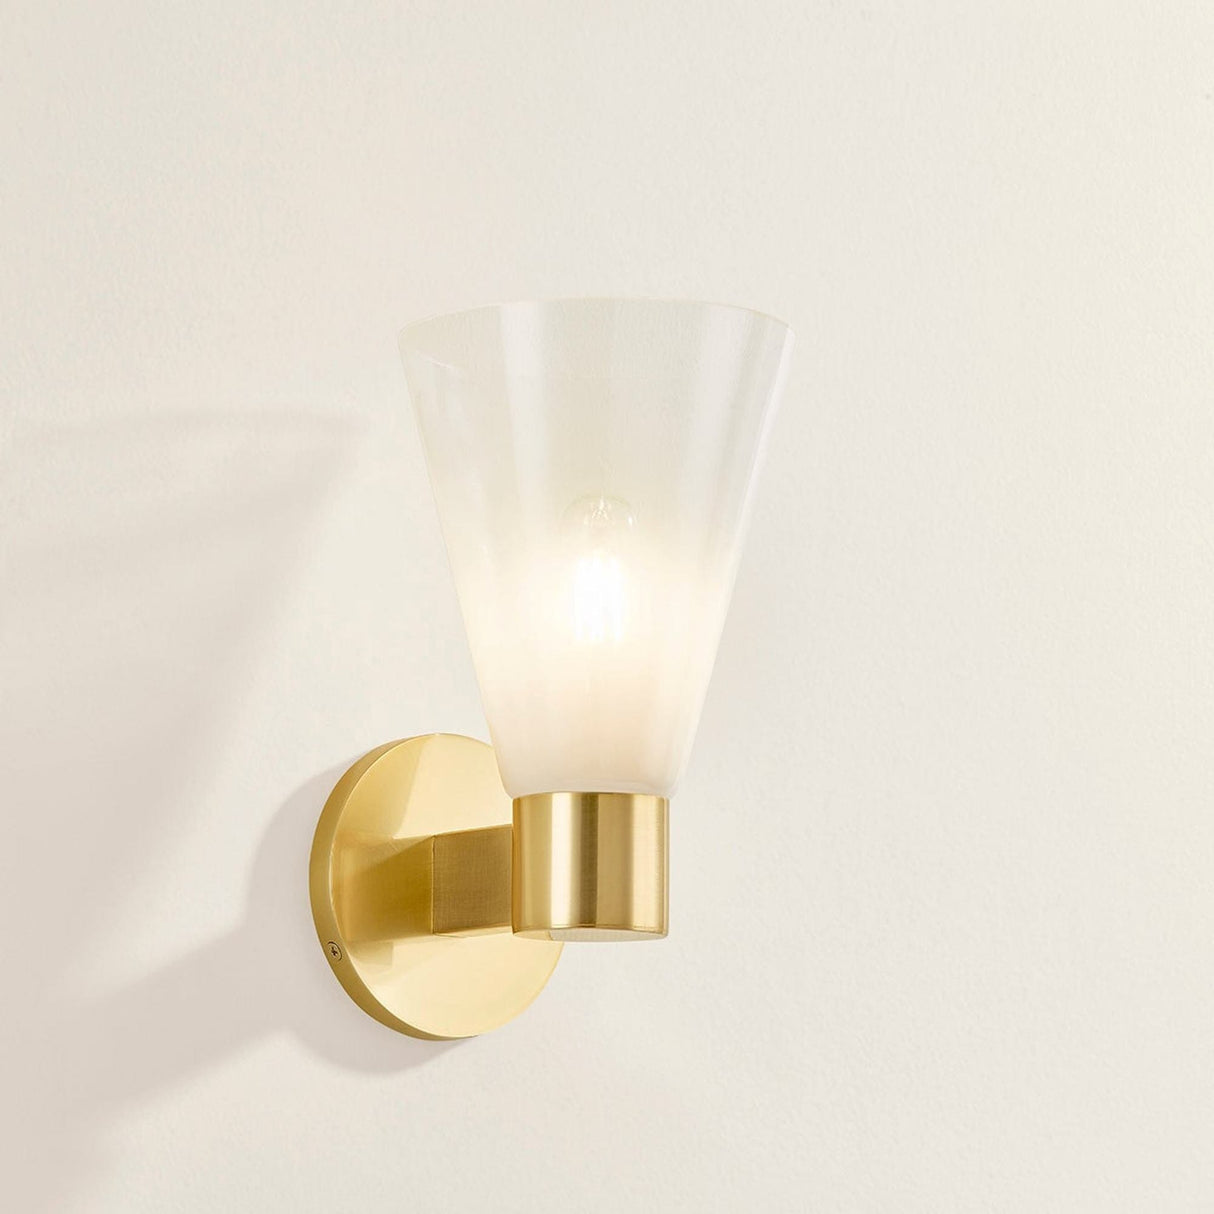 Mitzi Alma One Light Wall Sconce Wall Sconces